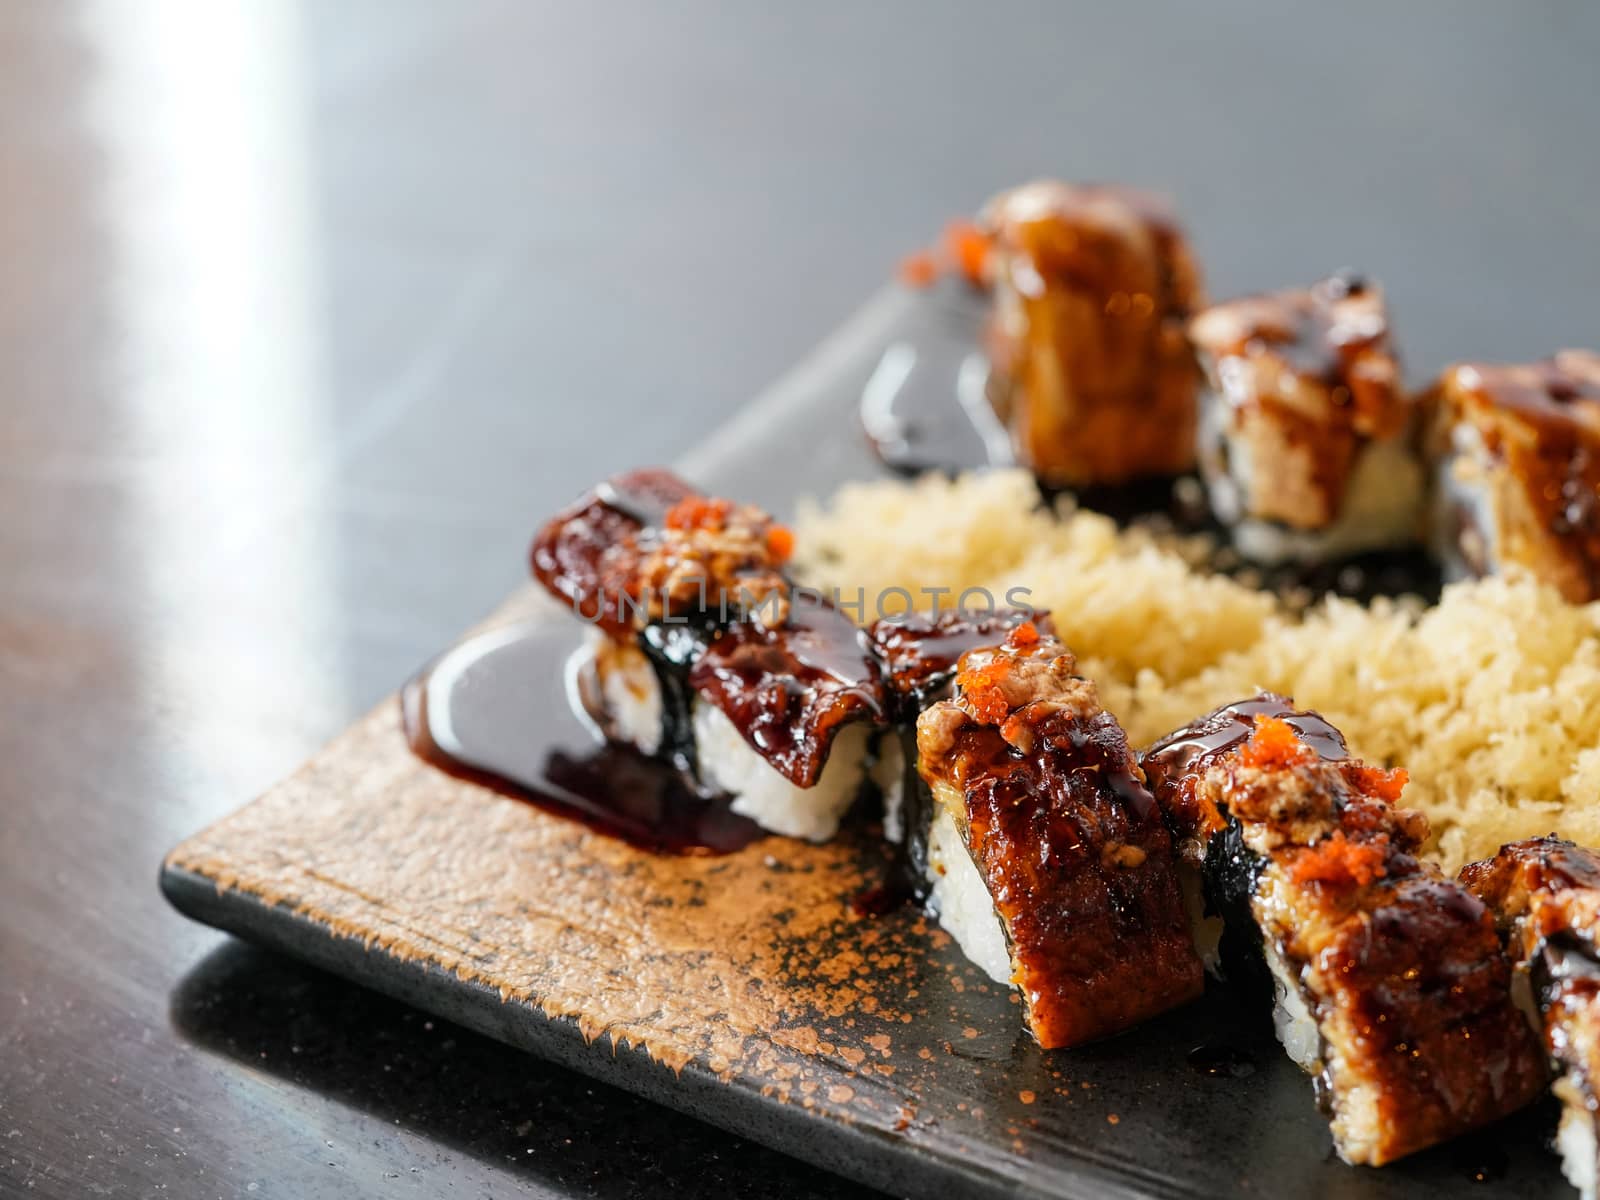 Anago sushi topped with Foie Gras, served with tempura crust on a black plate. Japanese Cuisine Buffet.